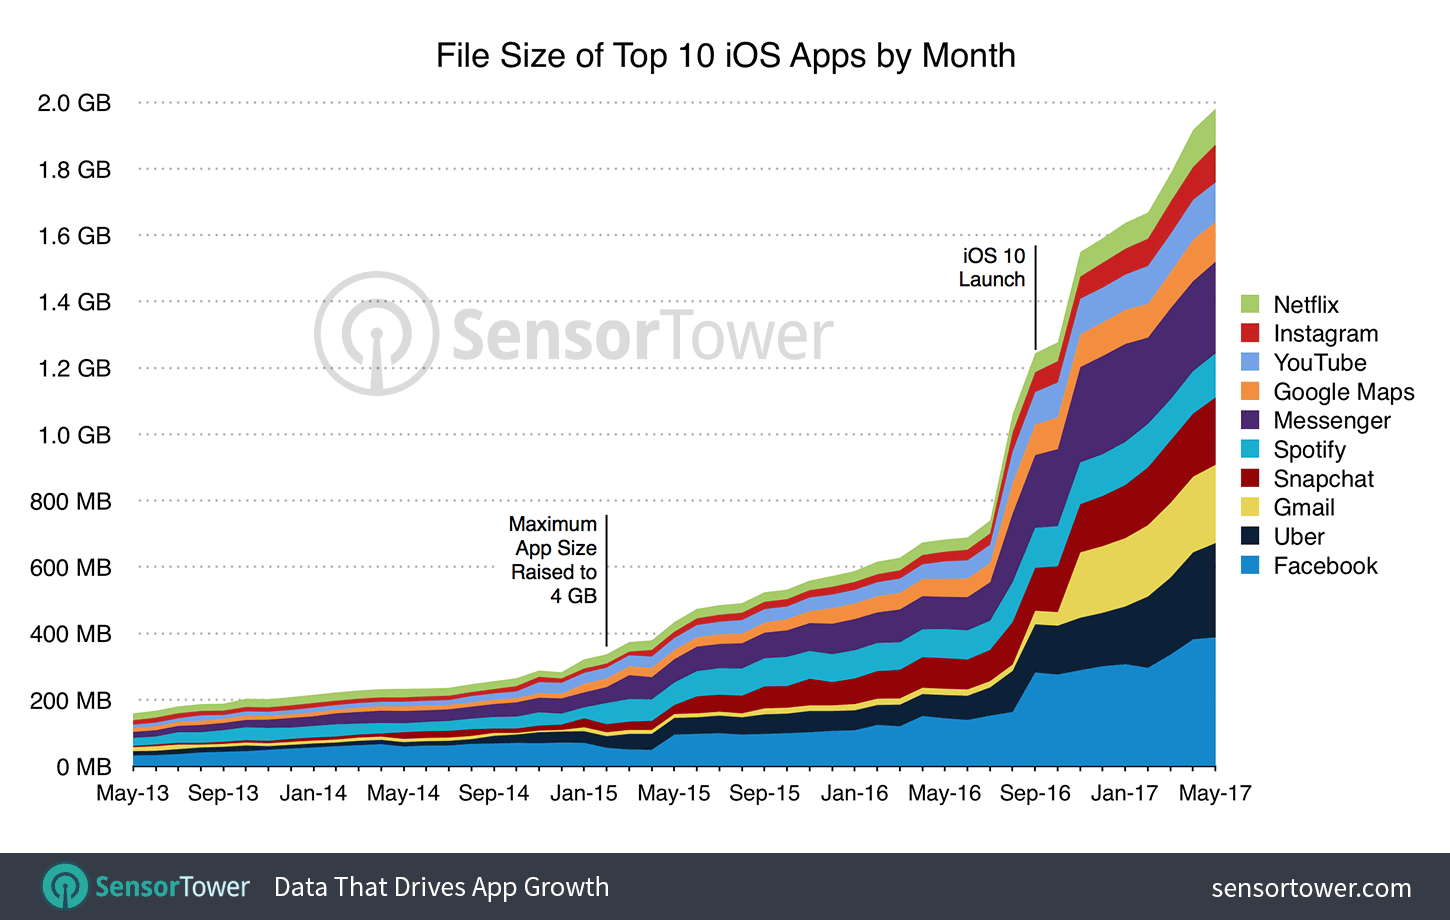 Chart showing the increase in storage space needed by the top 10 iOS apps from May 2013 to May 2017